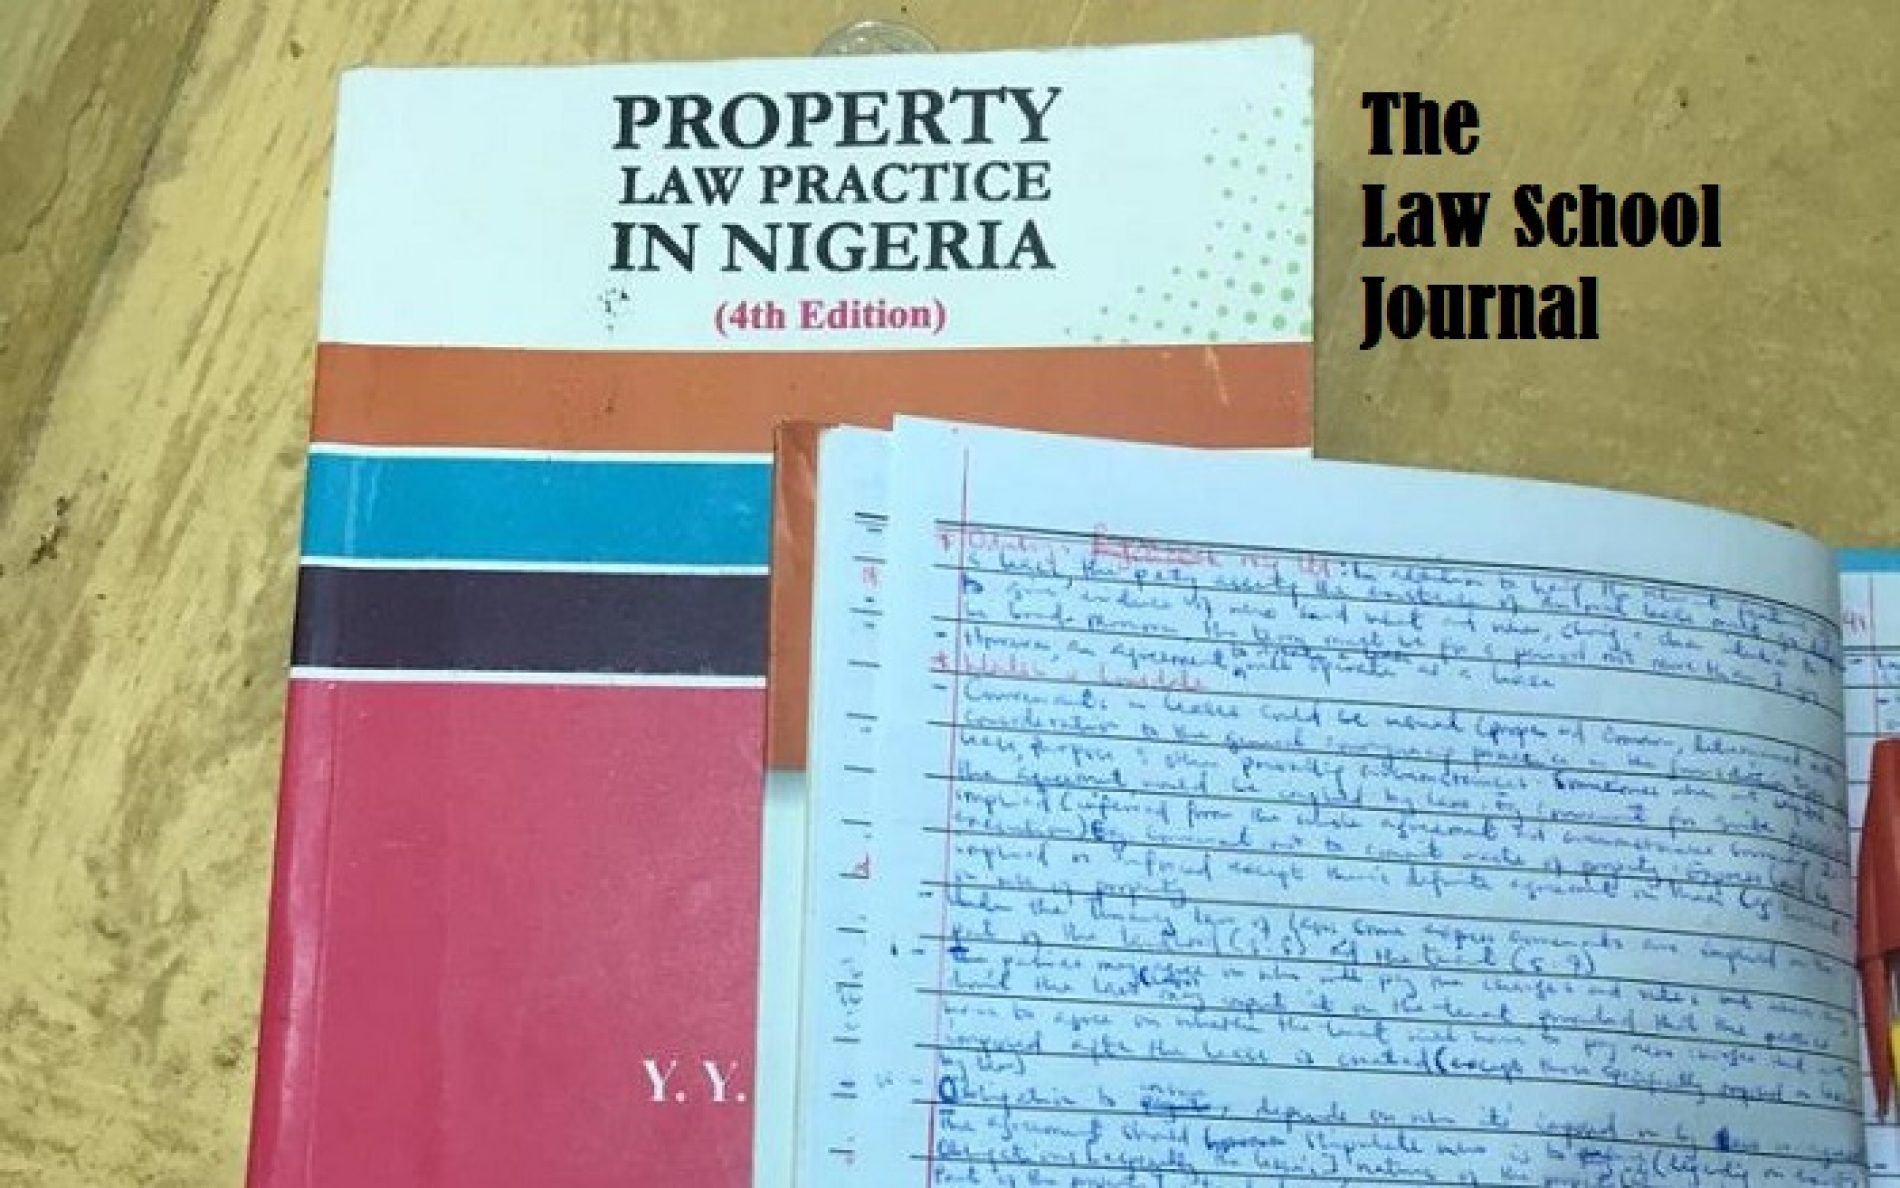 The Law School Journal (Entry 2)